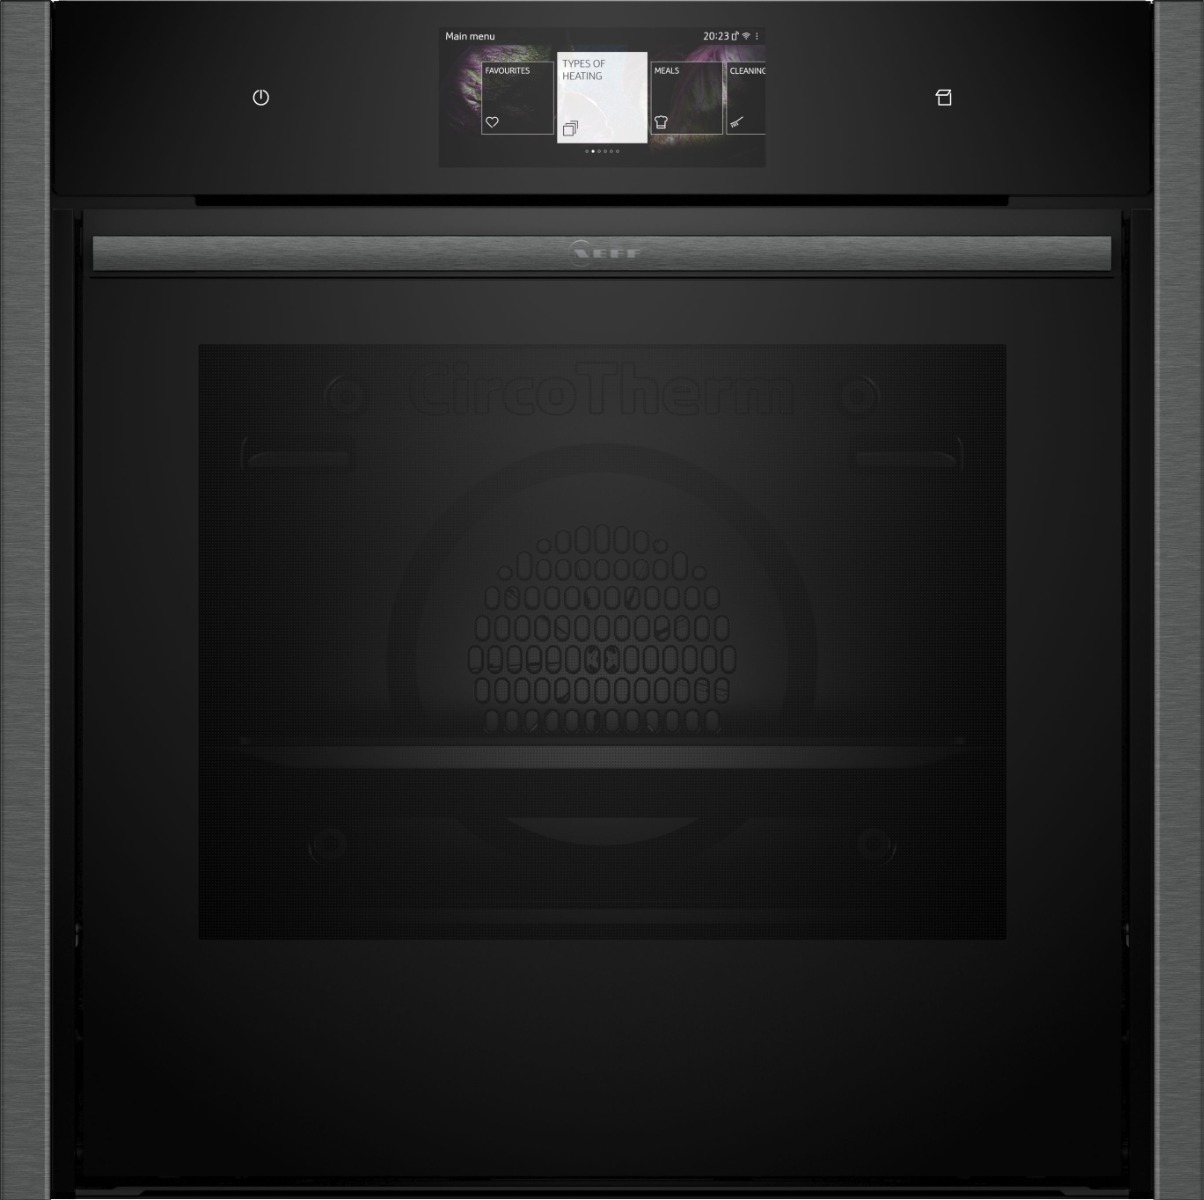 Neff B64FT53G0B Built-In Slide and Hide Single Ovens - Black with Graphite-Grey Trim